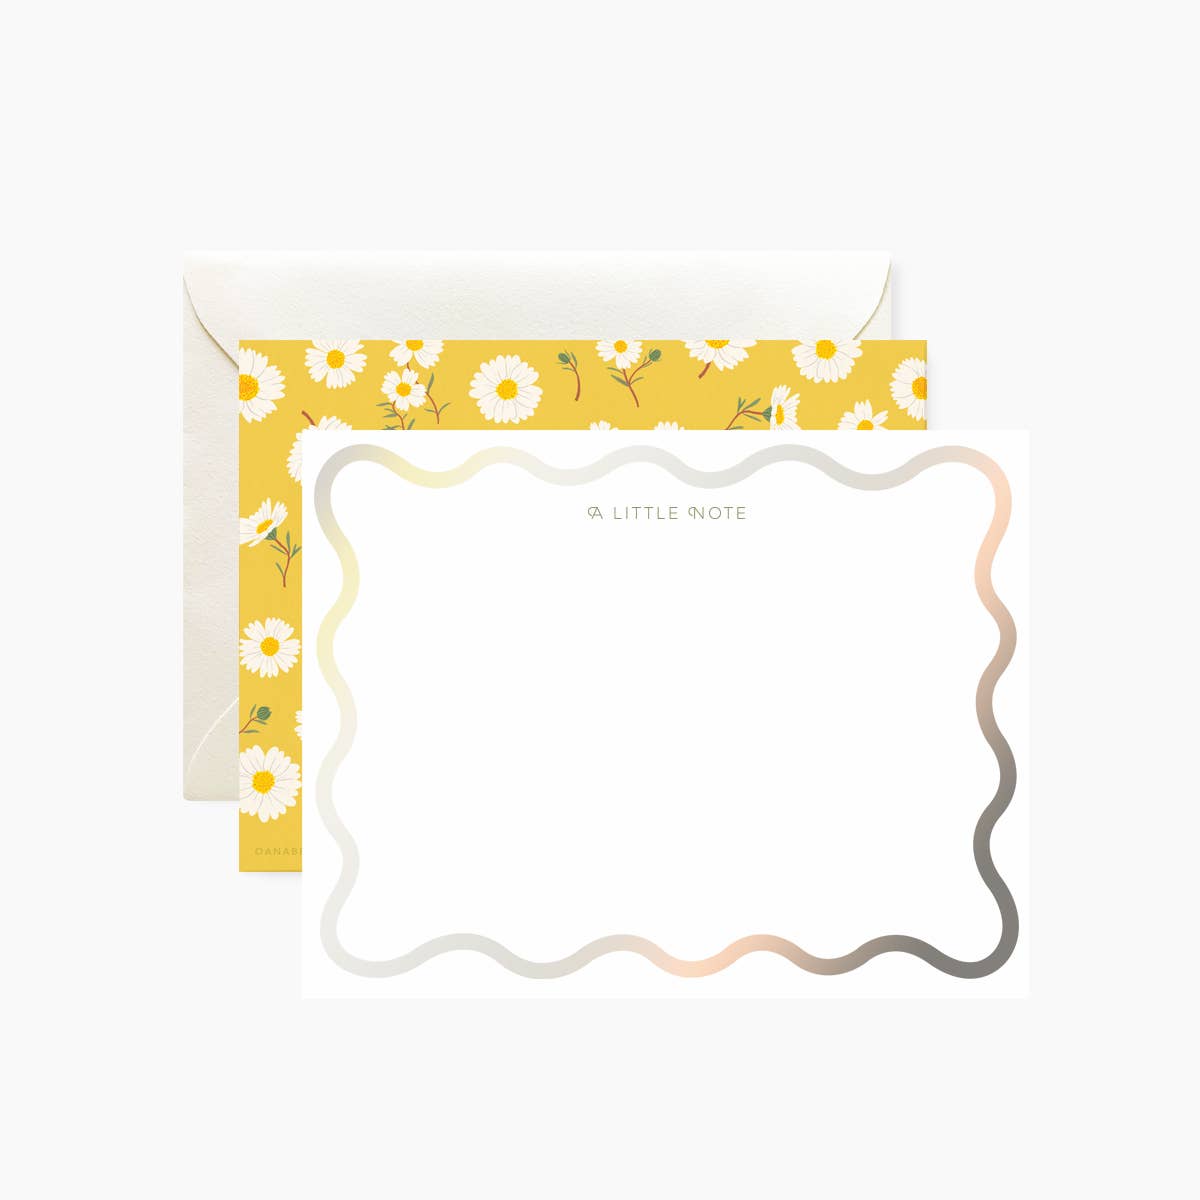 "A LITTLE NOTE" DAISY Notecards | Set of 4